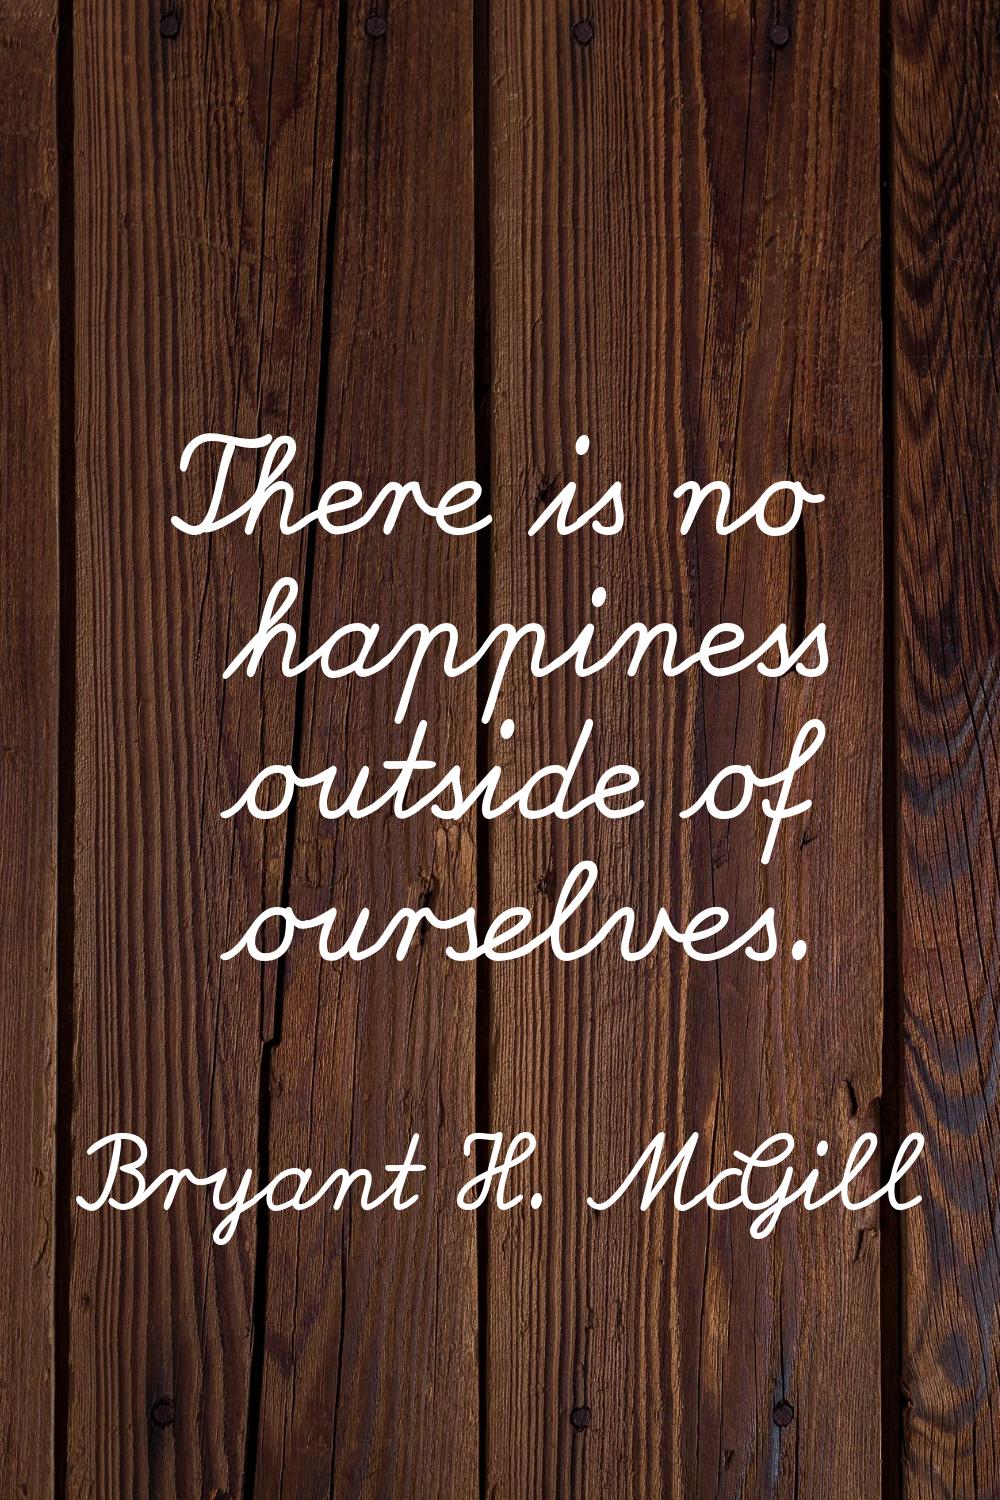 There is no happiness outside of ourselves.